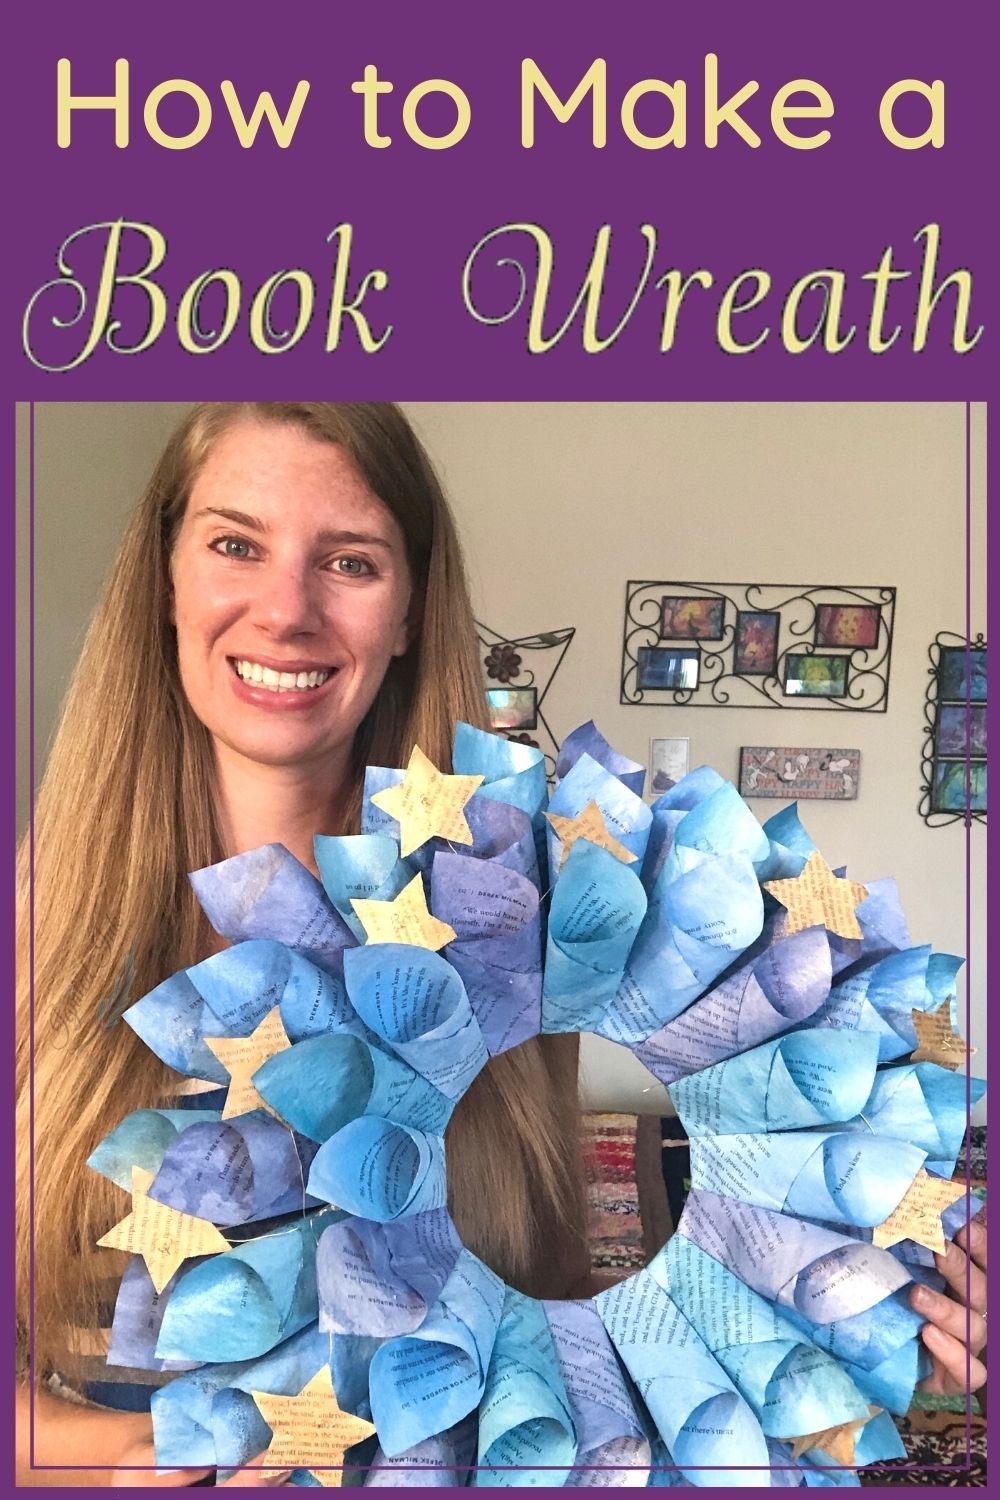 Easy Craft Projects Based on Favorite Children's Books